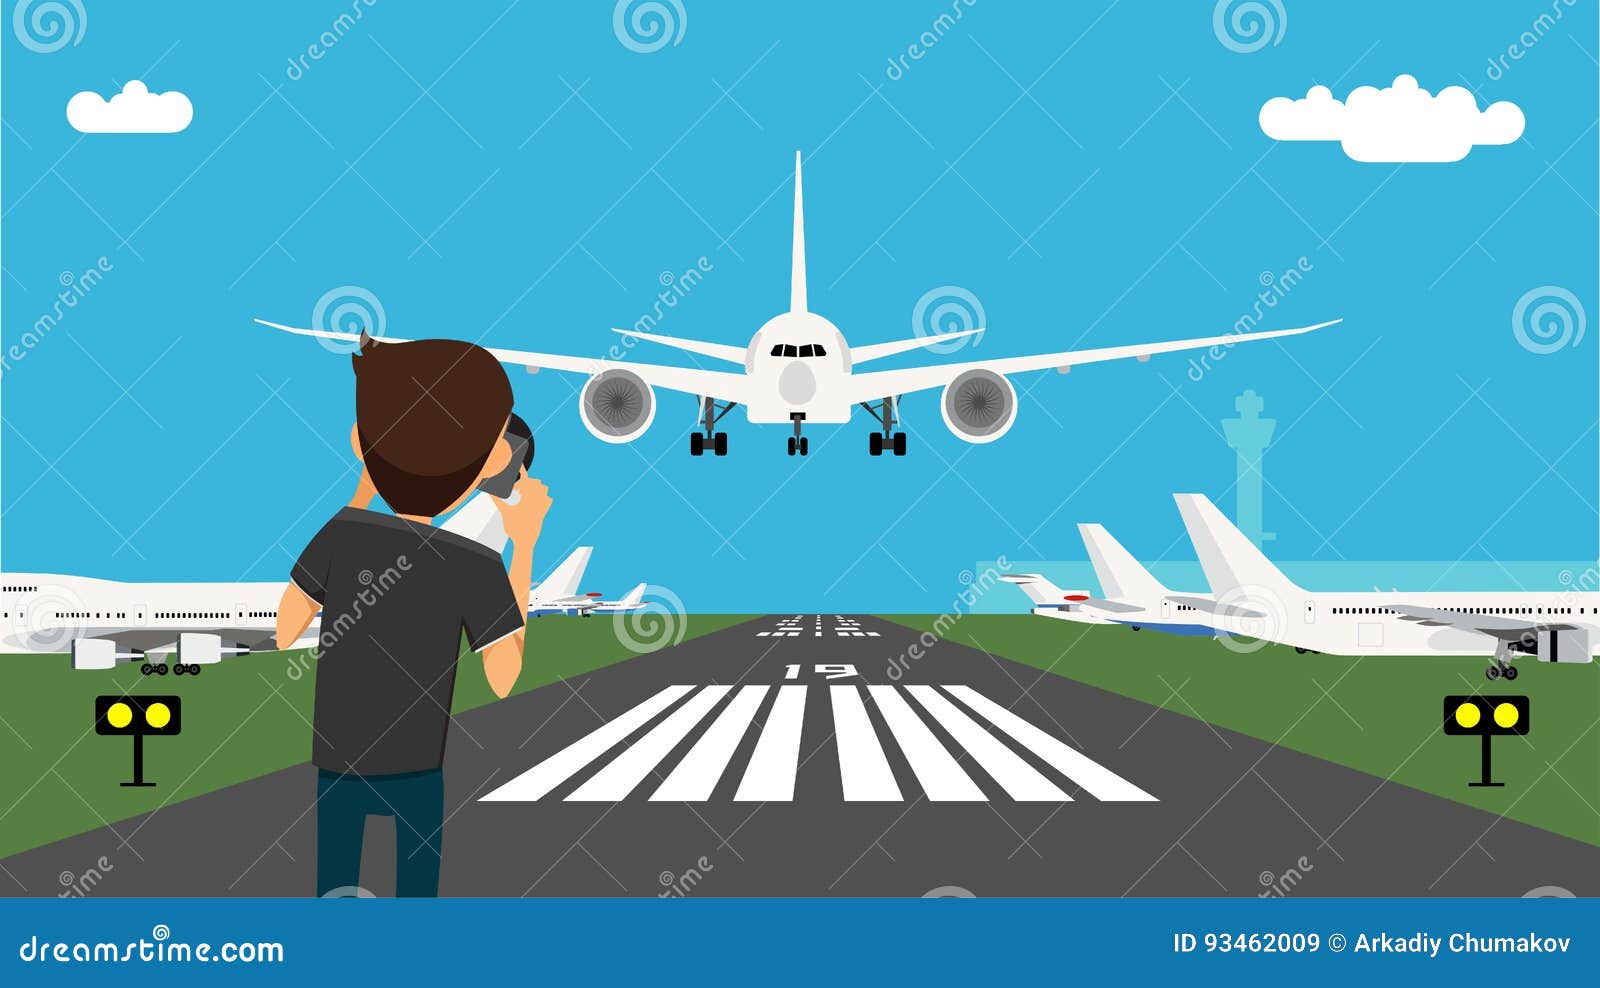 man taking picture of the glide path and landing plane using professional camera.